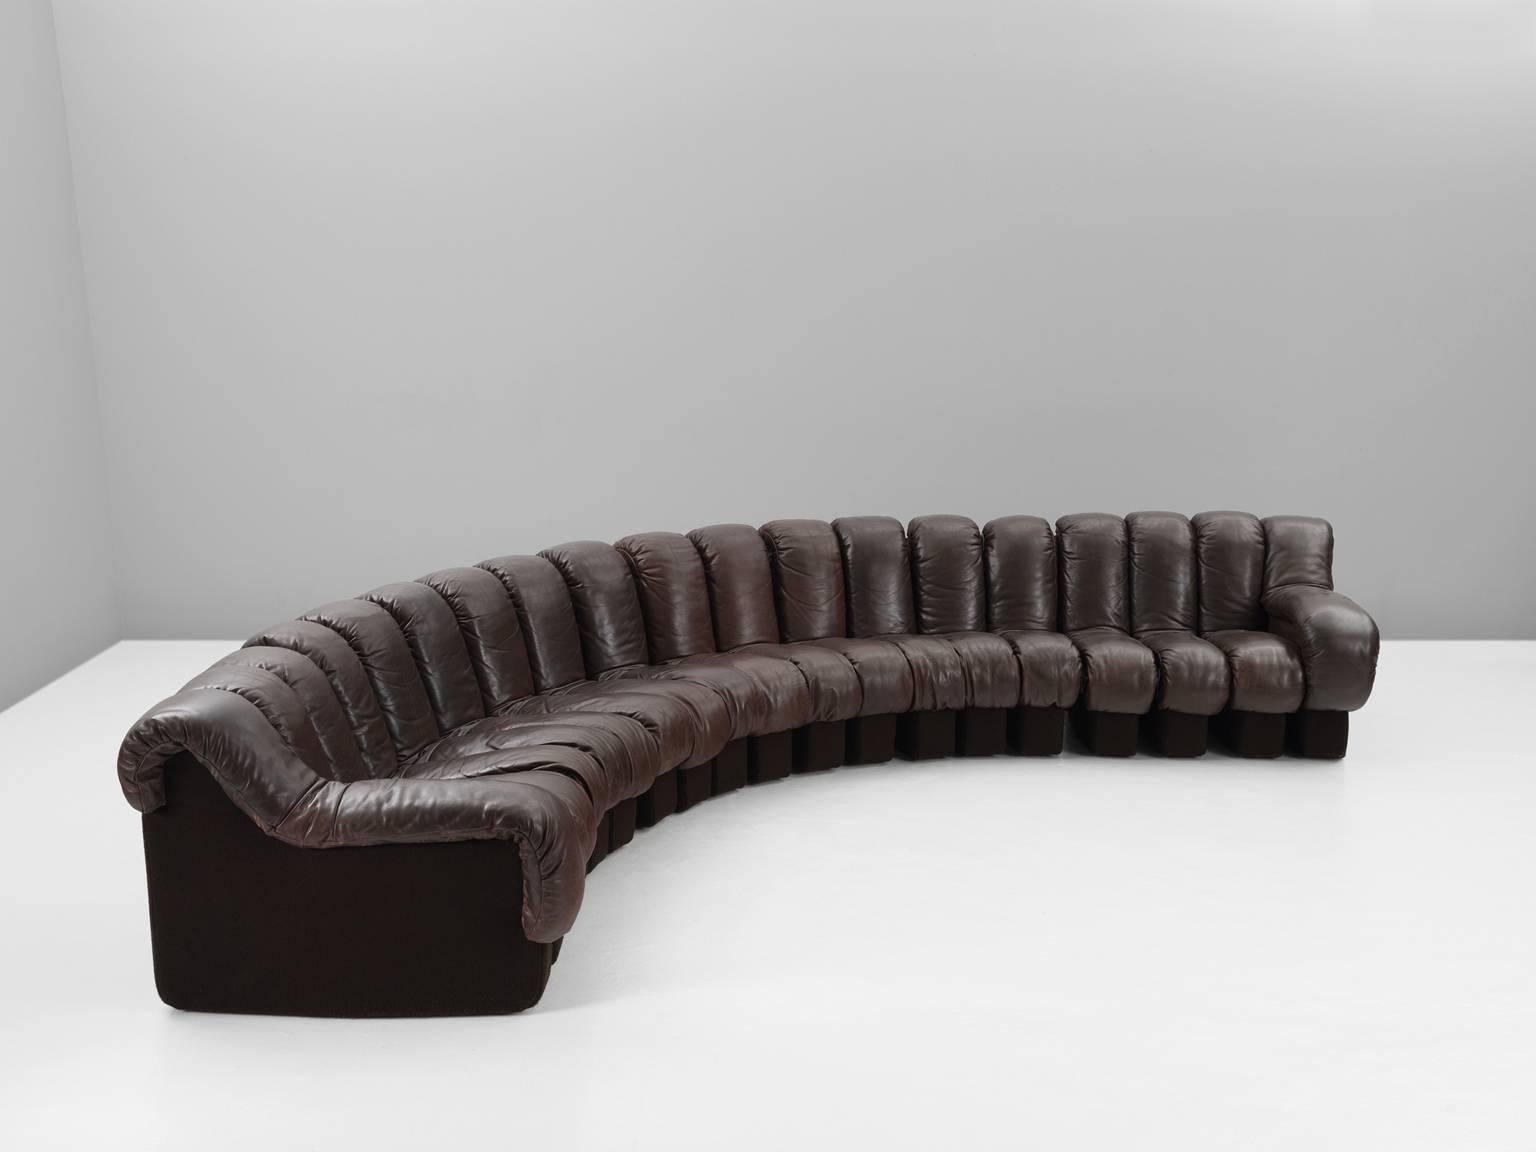 De Sede ‘Snake’ DS-600, in dark brown leather, Switzerland, 1972. 

De Sede 'Non Stop' sectional sofa containing 19 pieces in original dark brown leather, of which 17 center pieces and two armrests. Any number of pieces can be zipped together